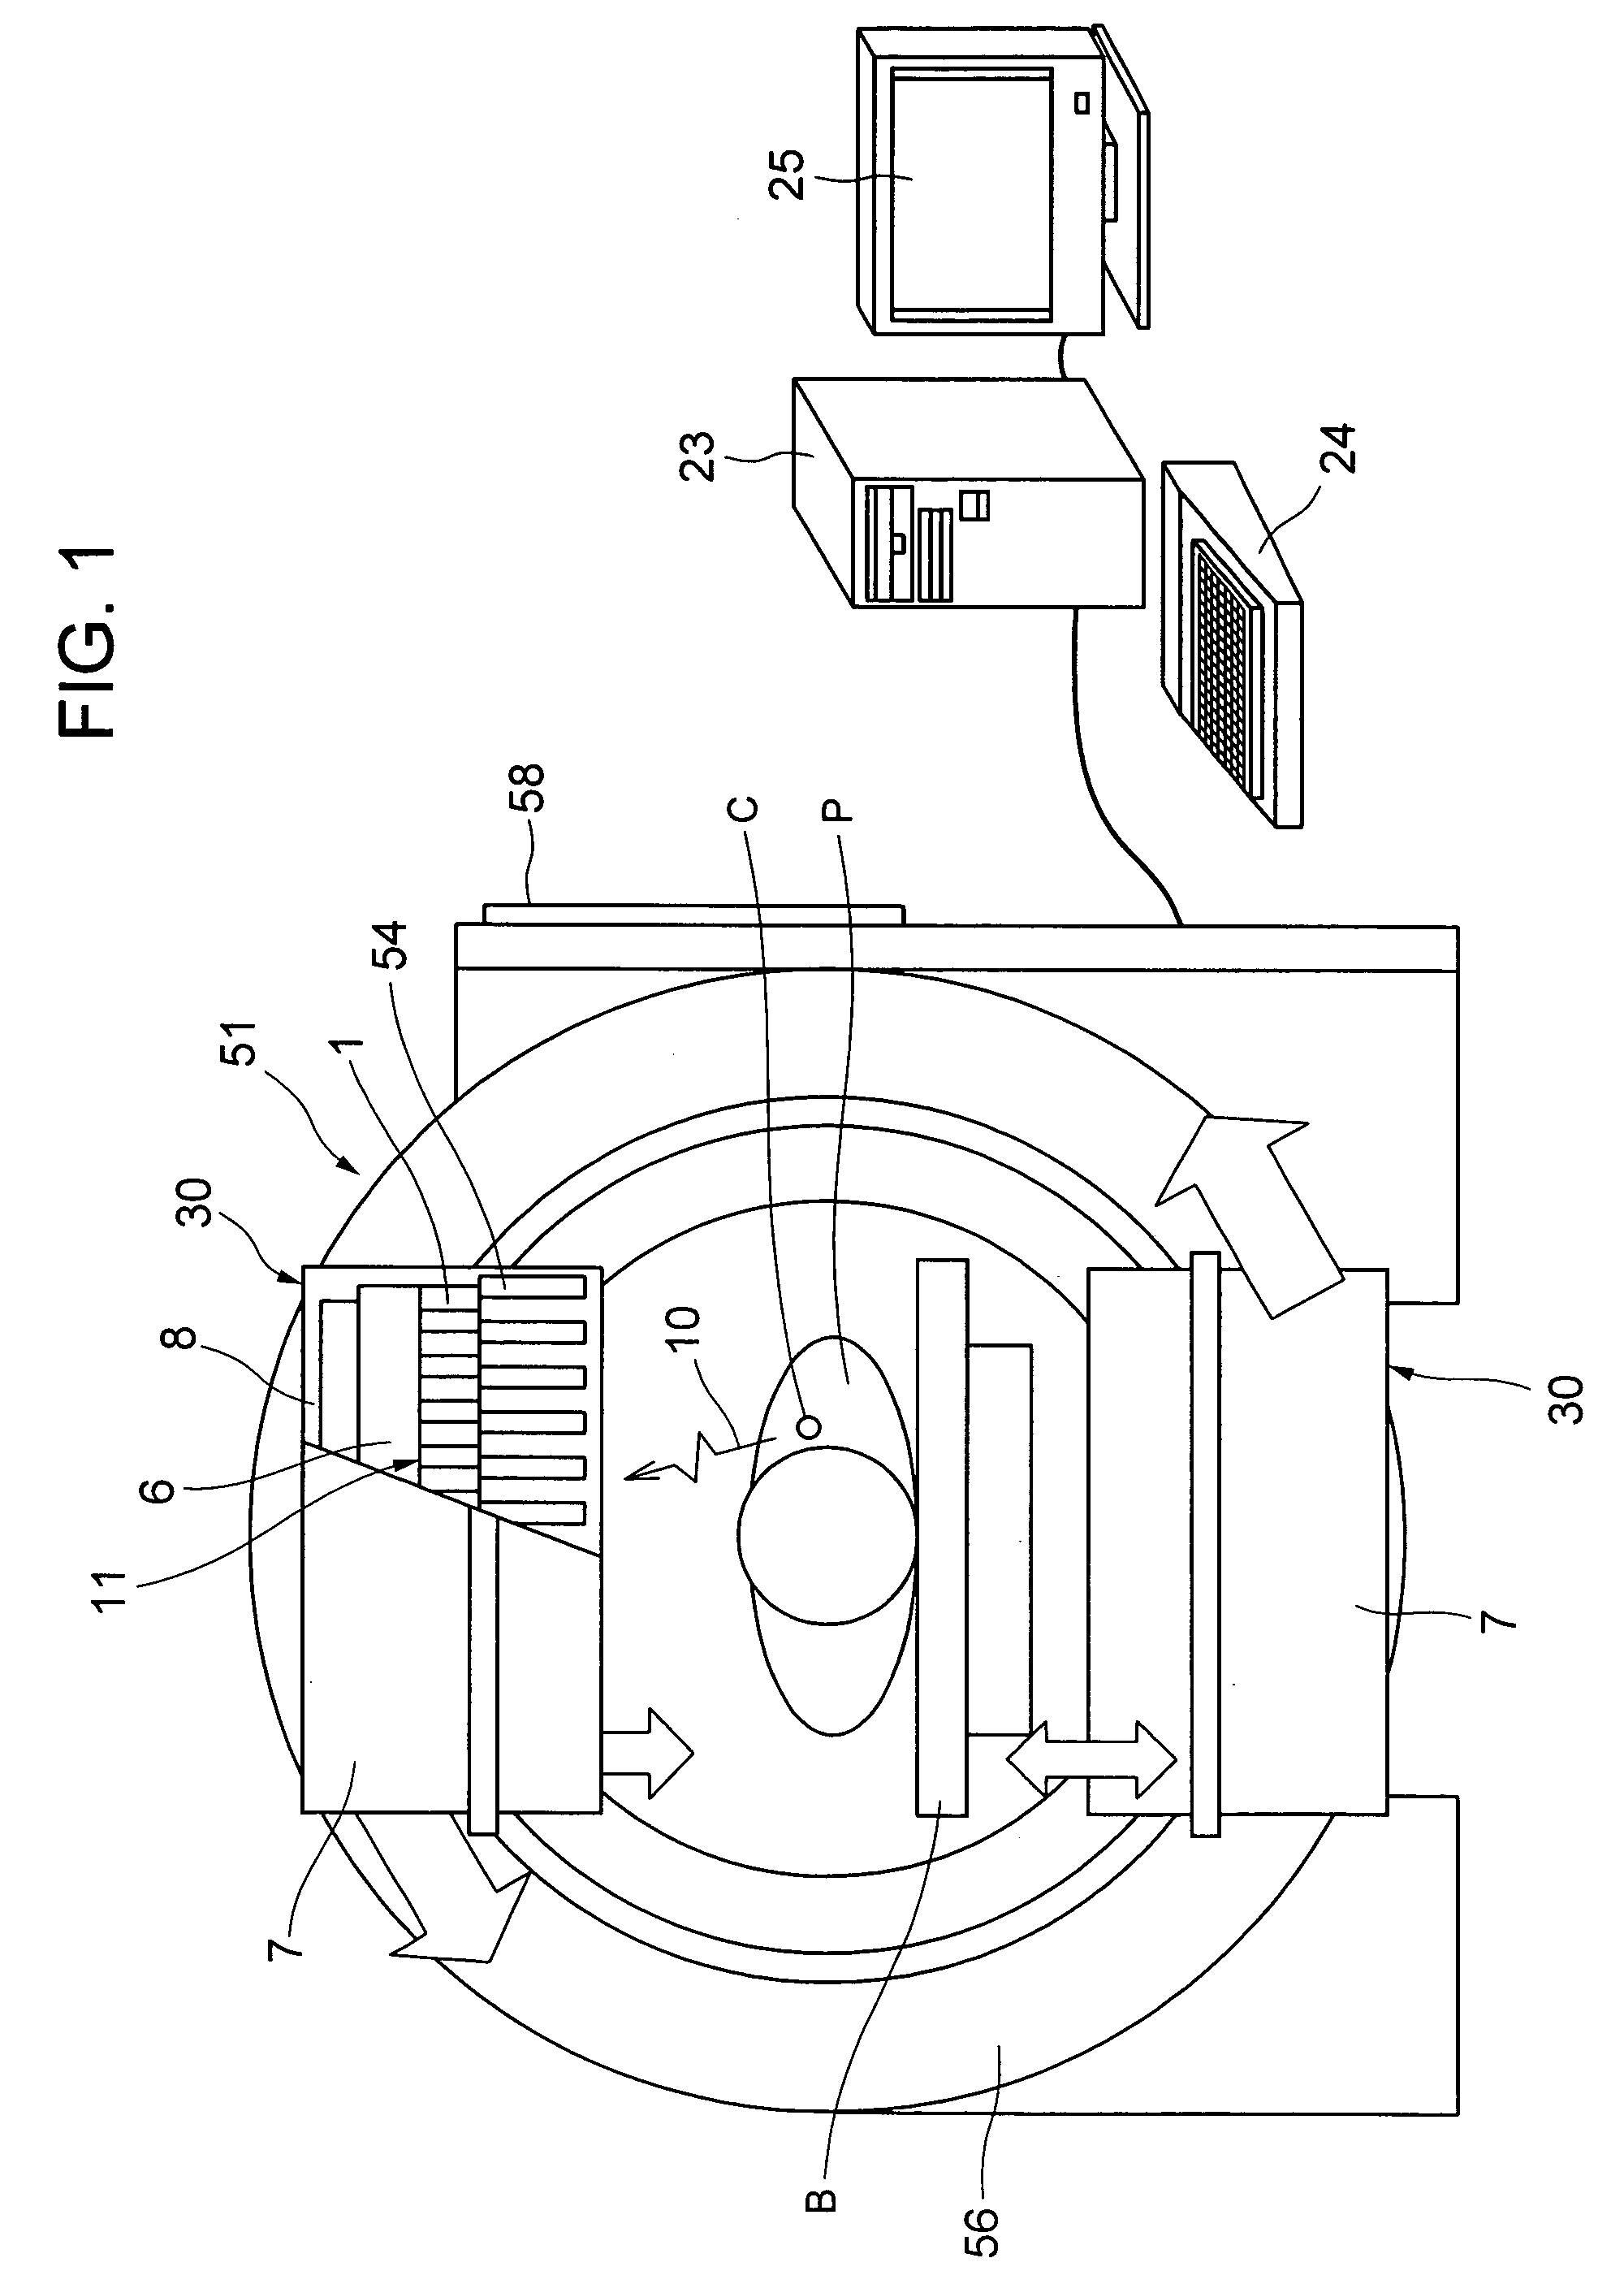 Semiconductor radiological detector and semiconductor radiological imaging apparatus